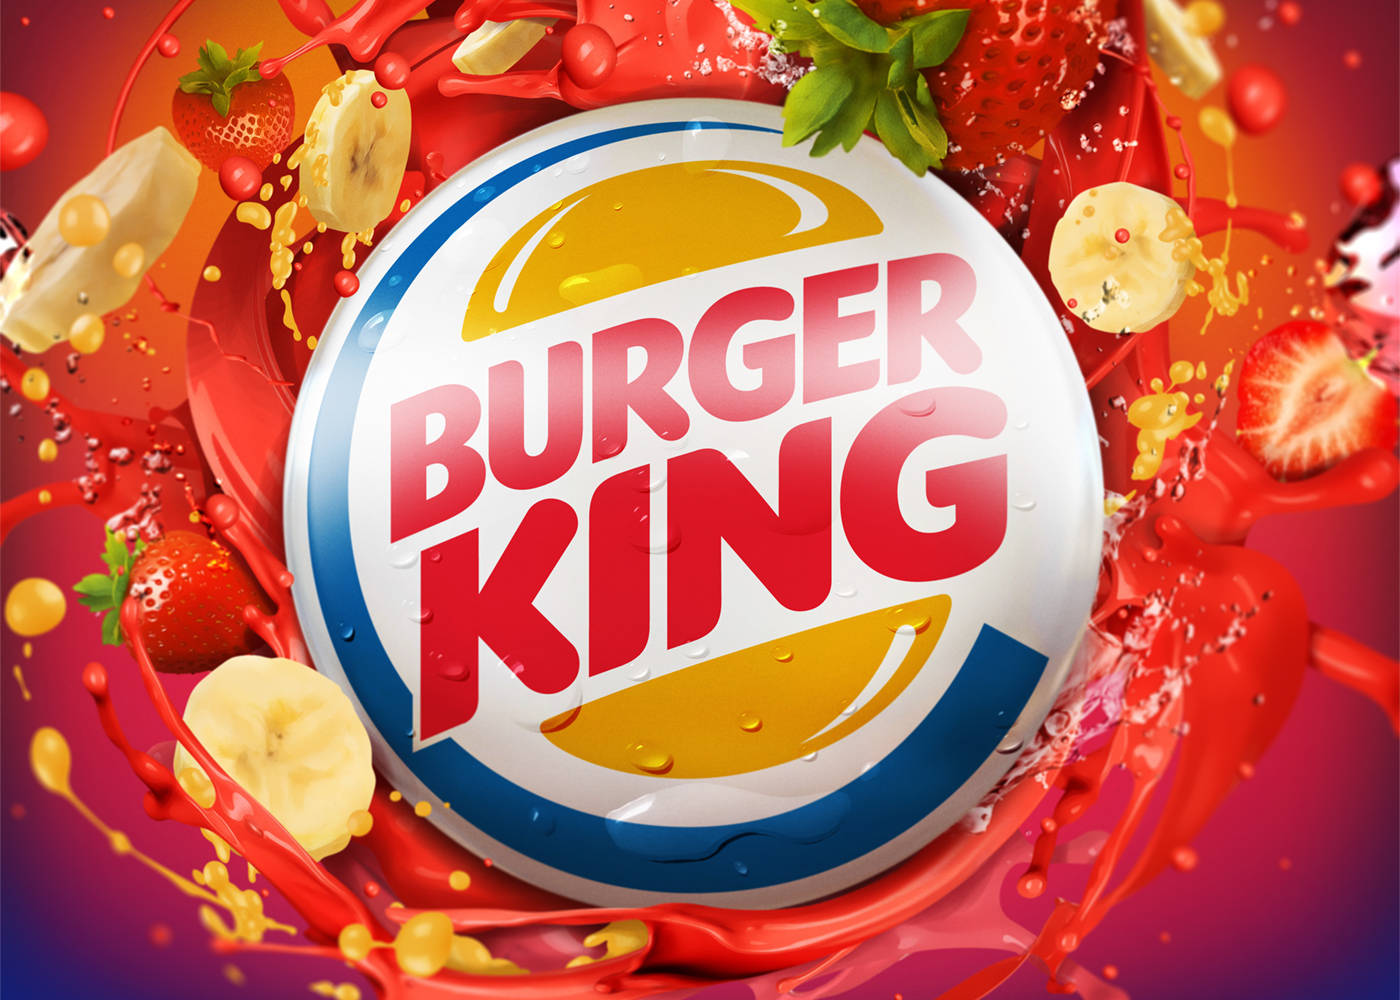 The Iconic Burger King Logo Against A Vibrant Red Background